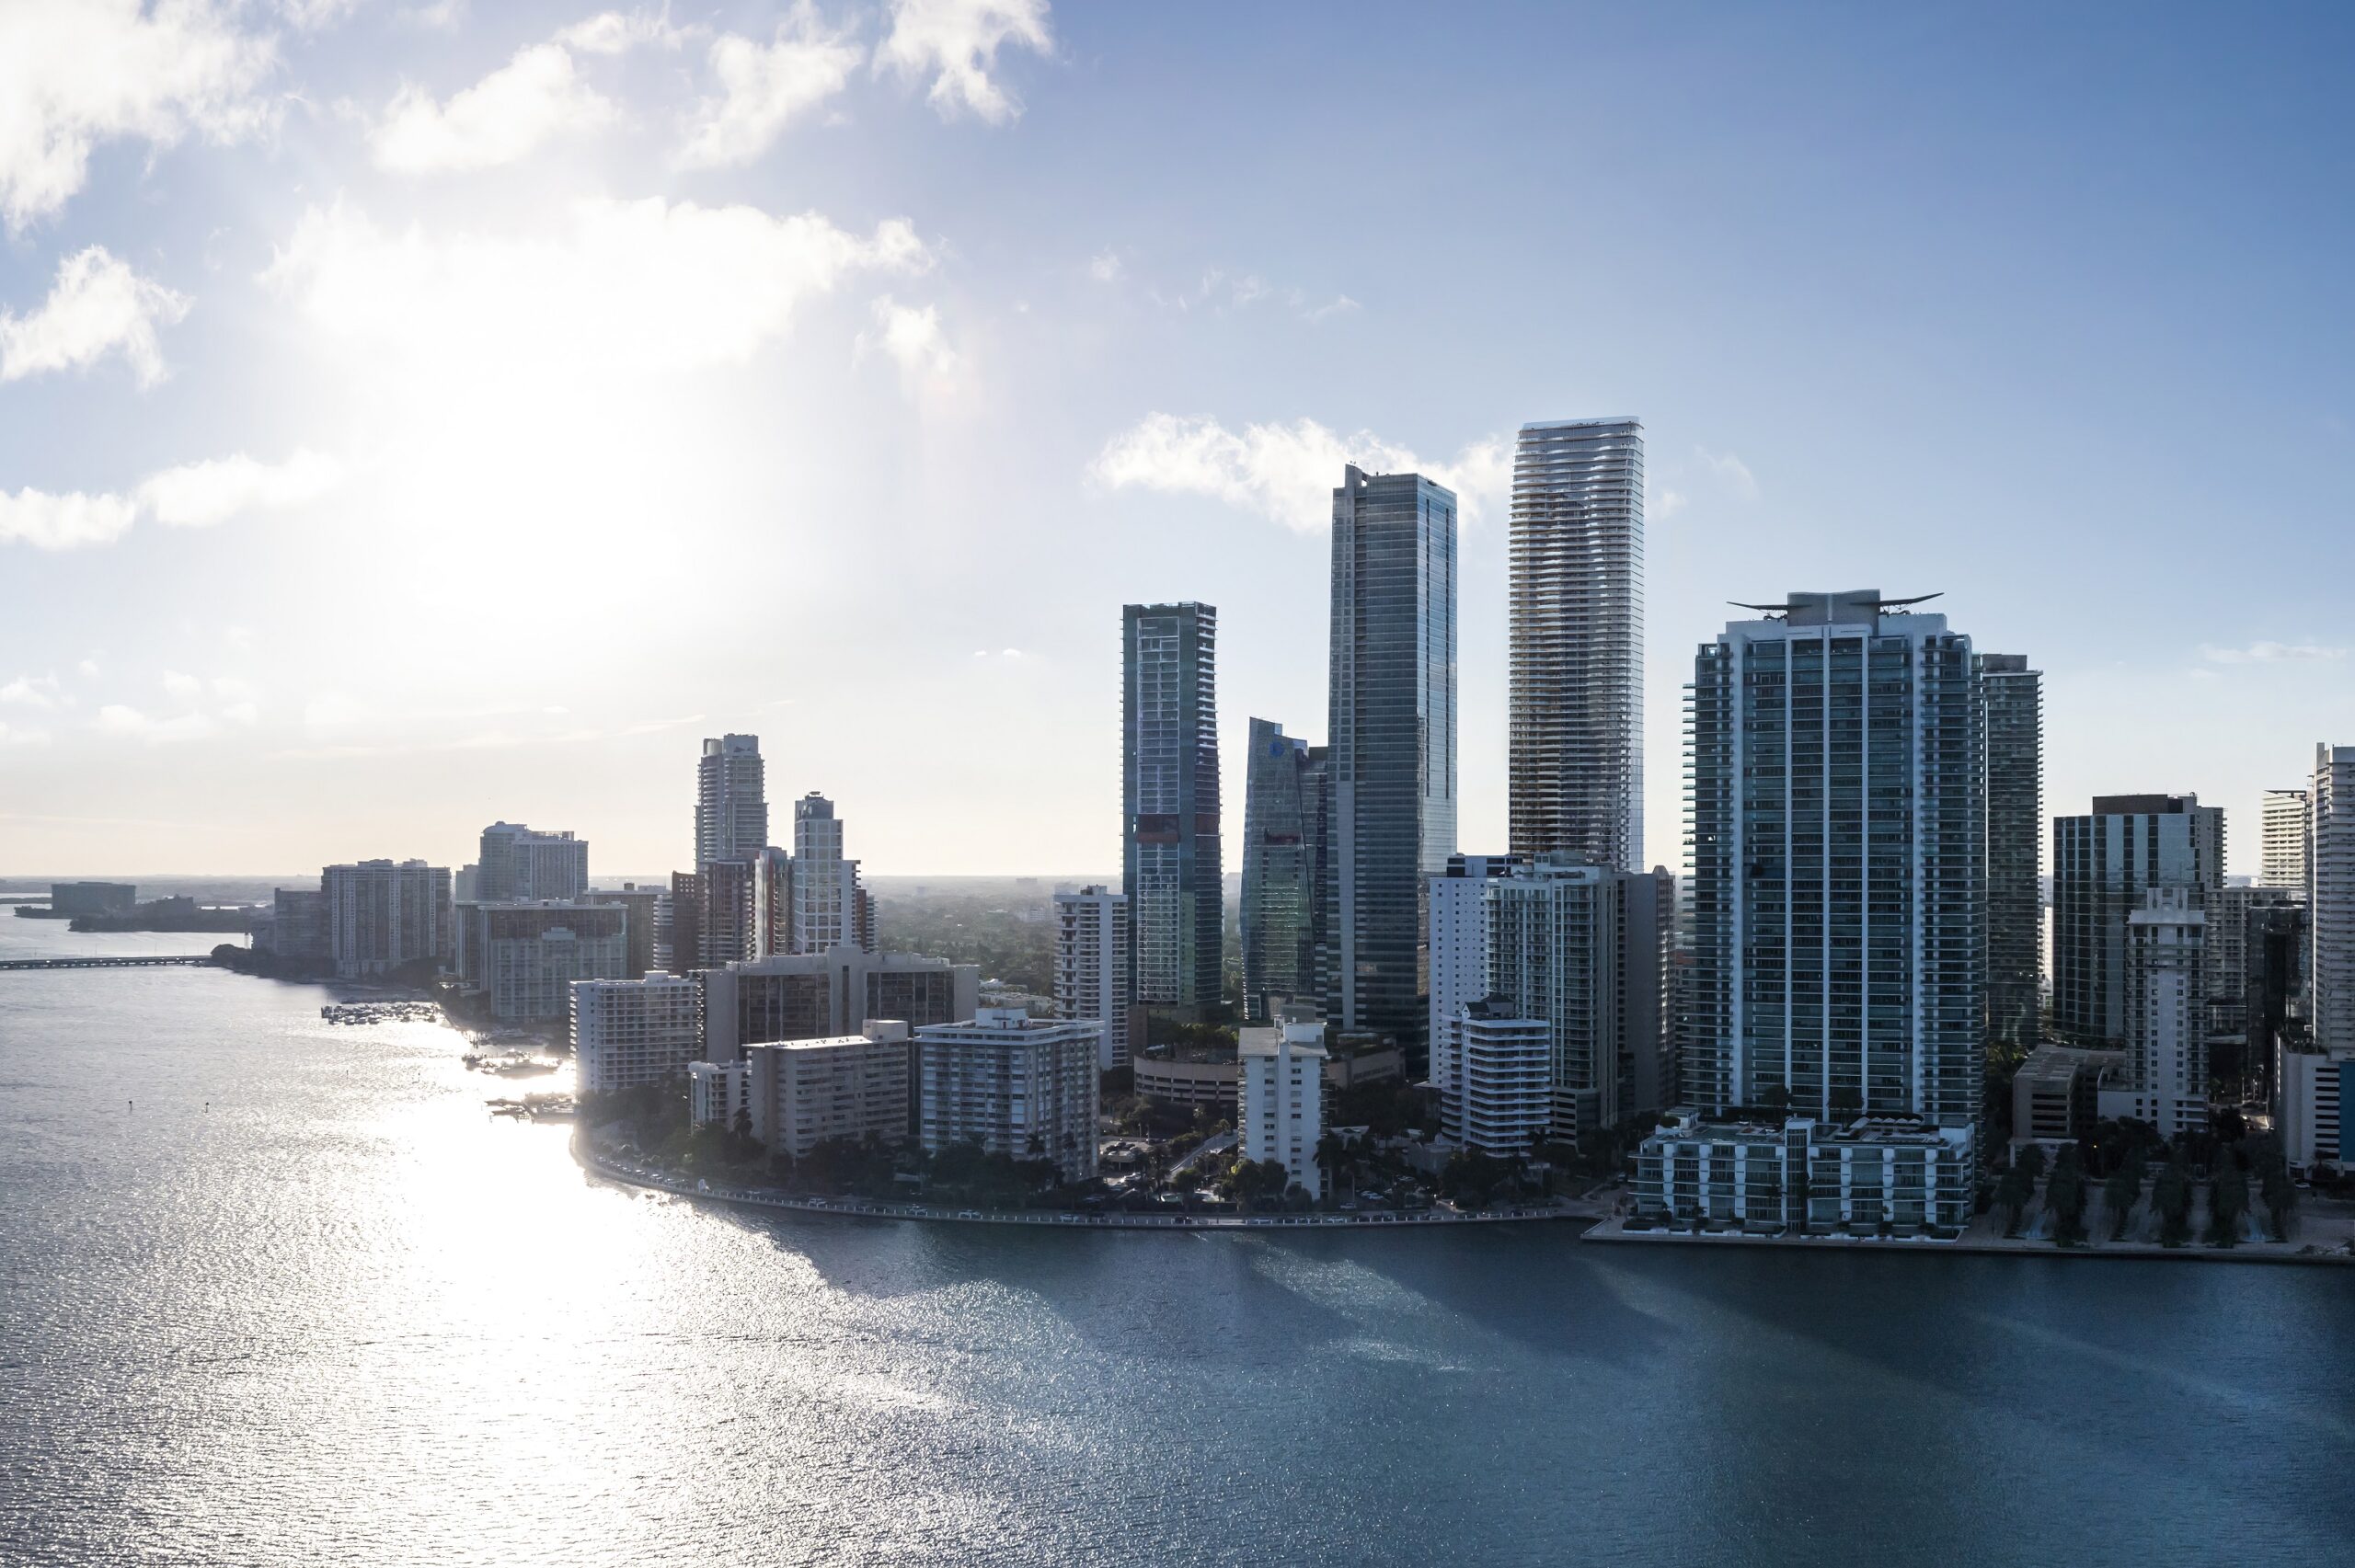 1428 Brickell Avenue - Chatburn Living - Residential Tower